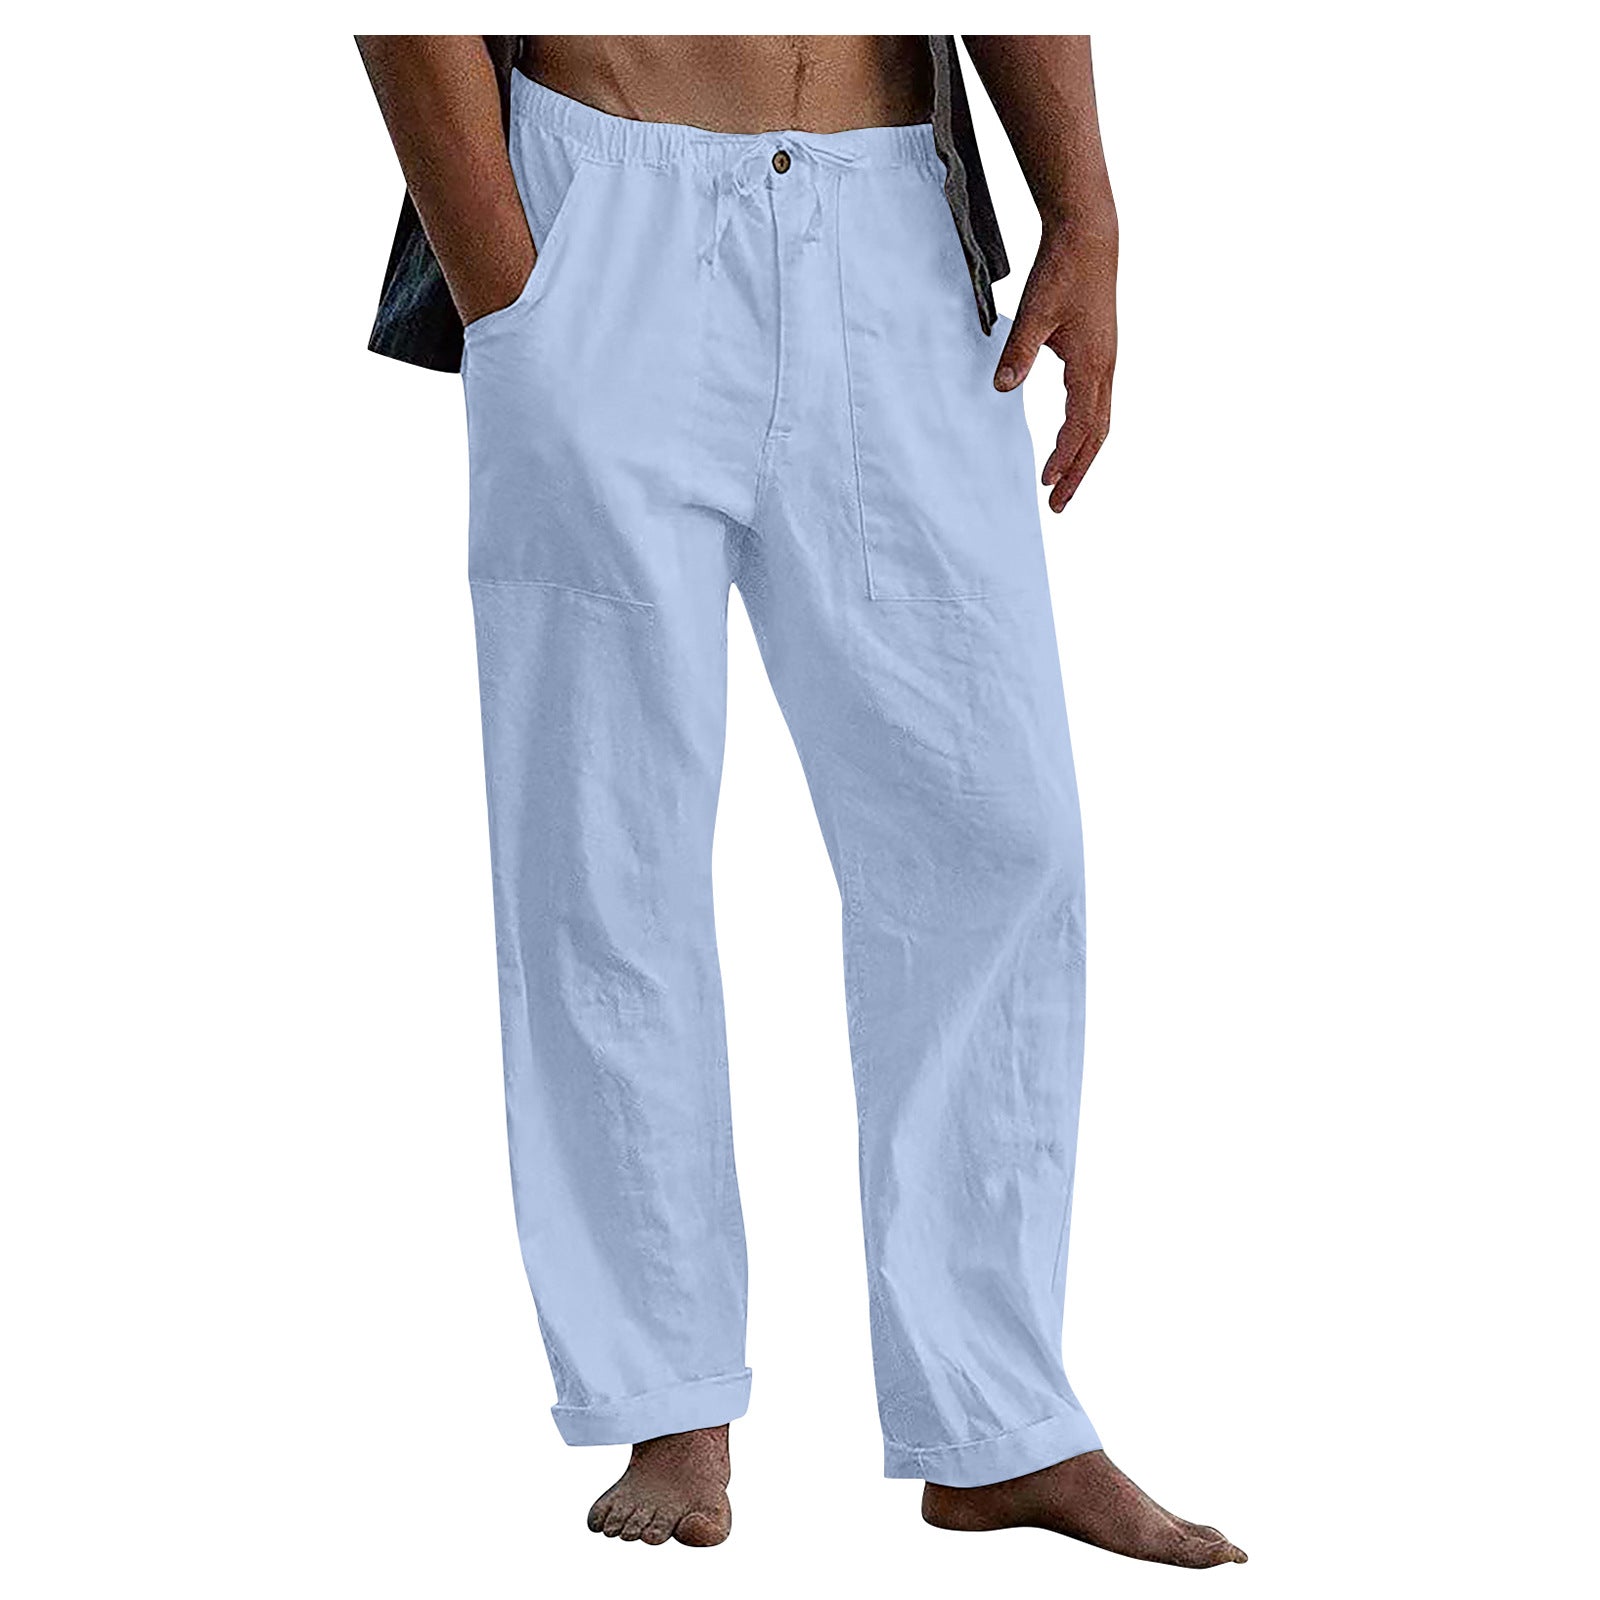 Casual Linen Men's Summer Beach Pants with Elastic Waist-Pants-Light Blue-S-Free Shipping at meselling99